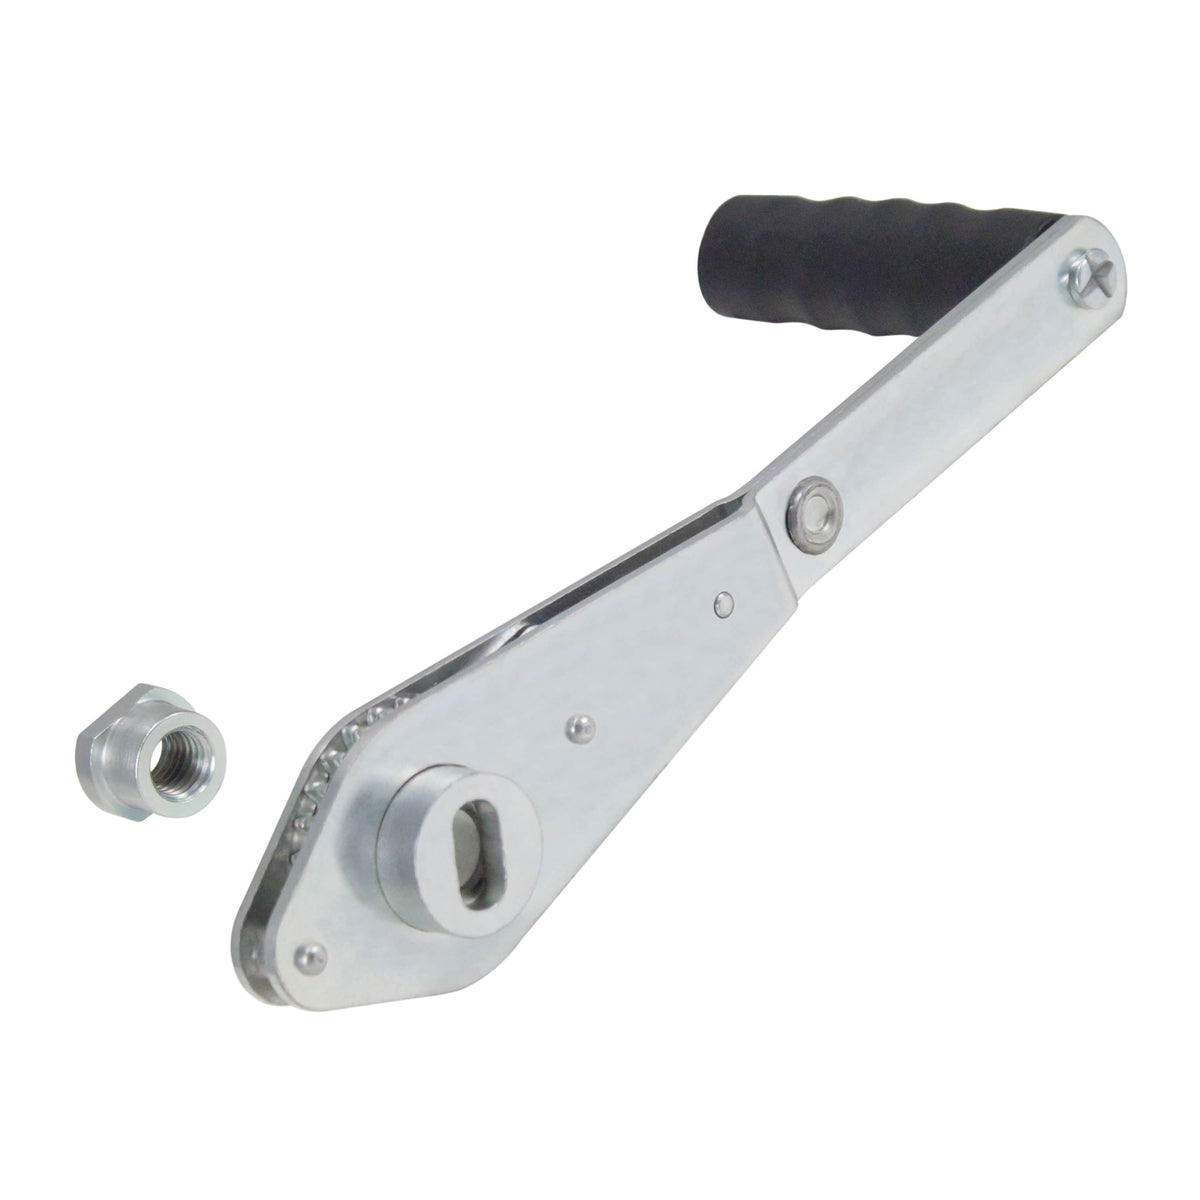 Dutton-Lainson Ratcheting Handle for Pulling Winch Model 6459 #70371